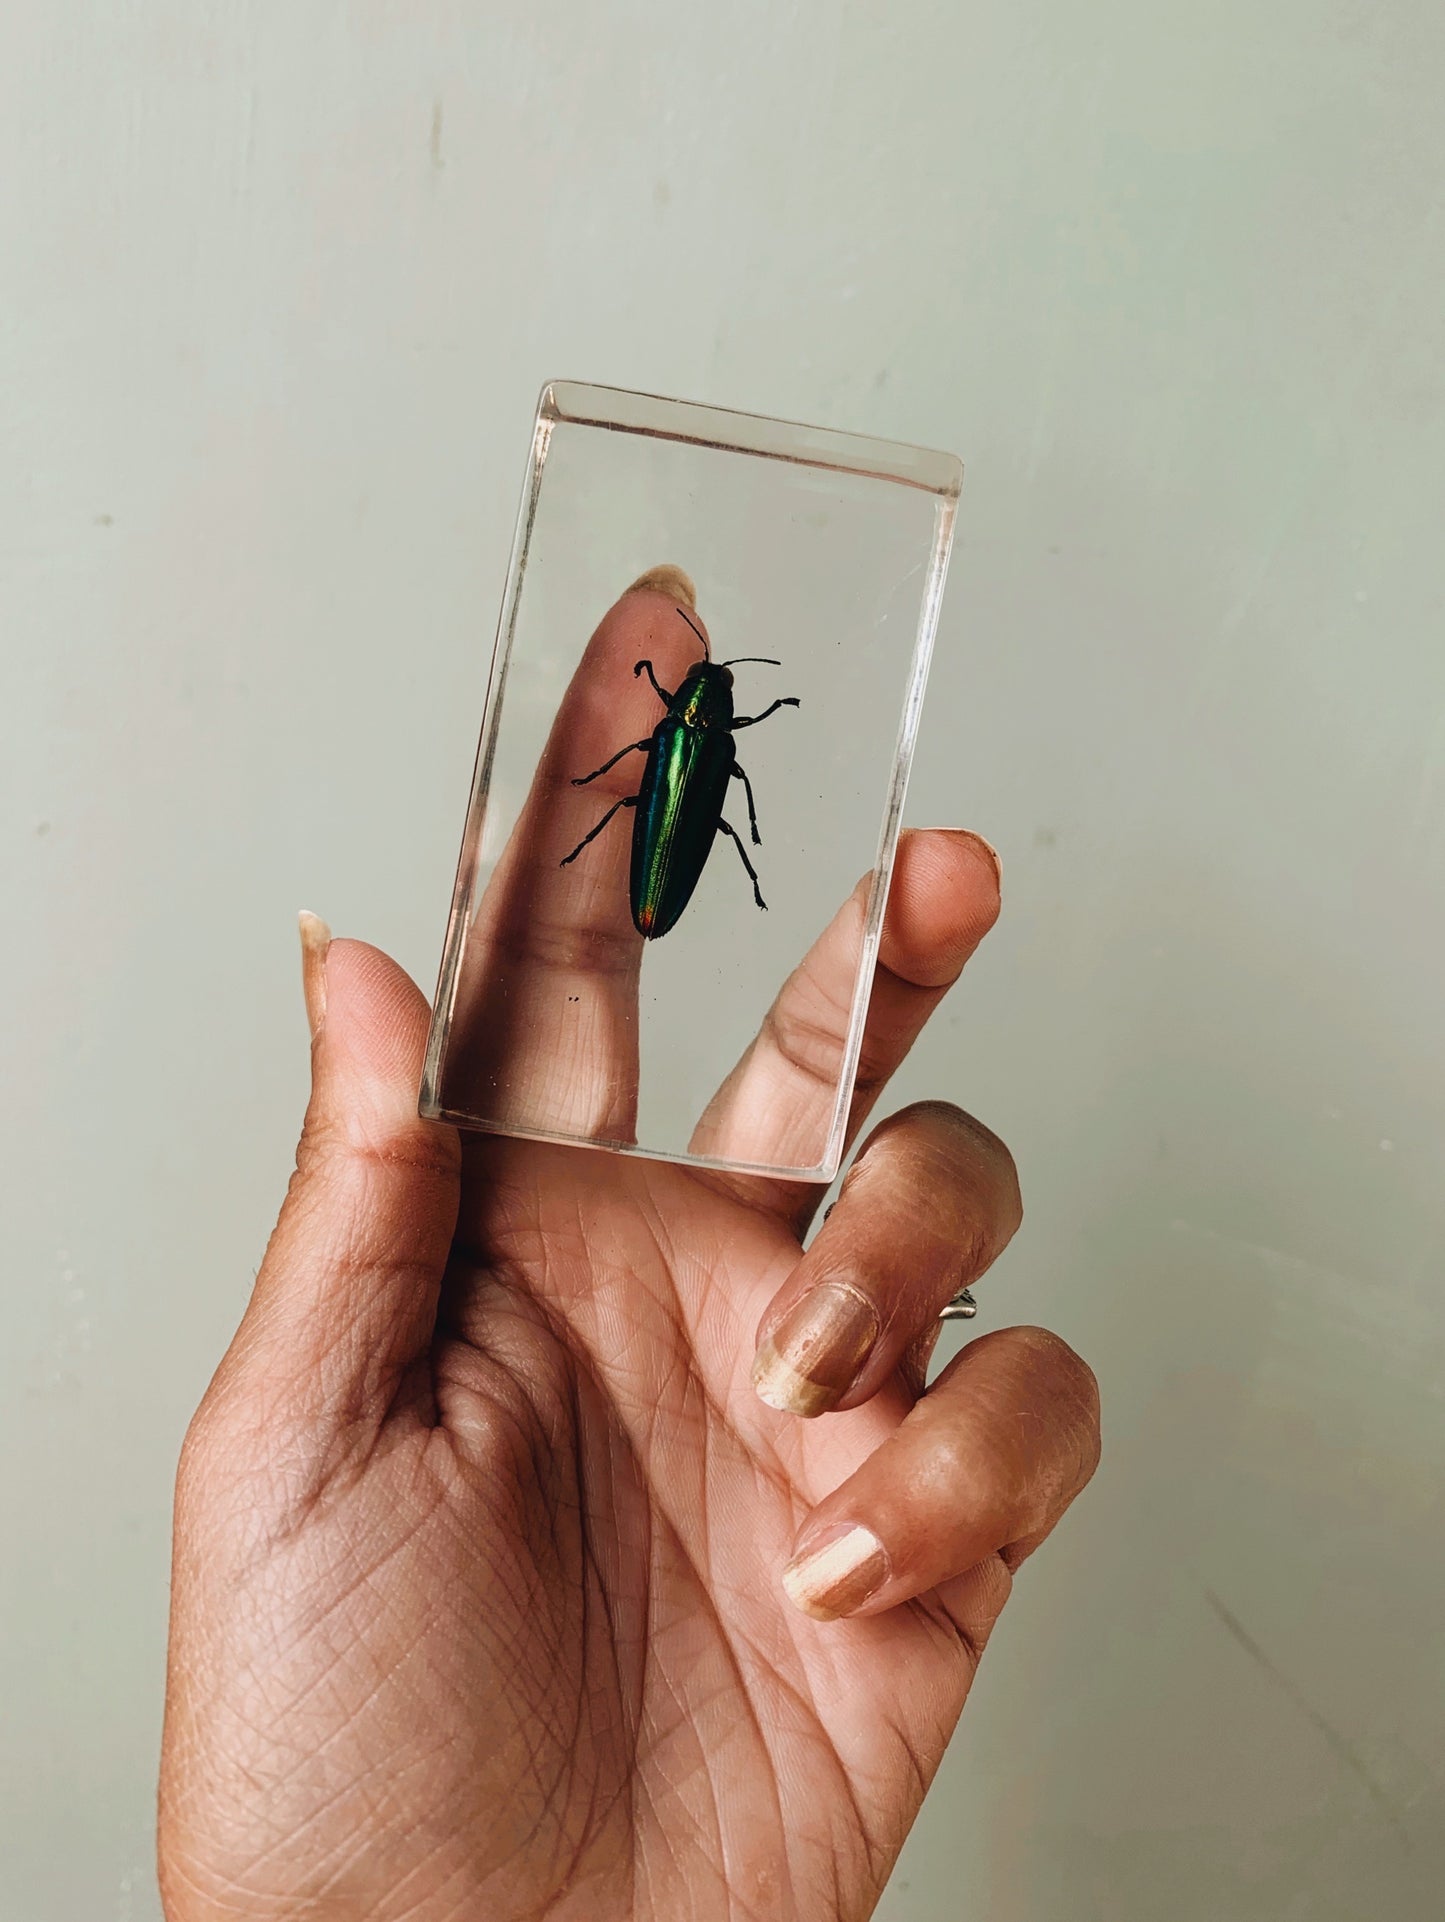 Vintage Taxidermy Insect / Bug / Beetle in Resin